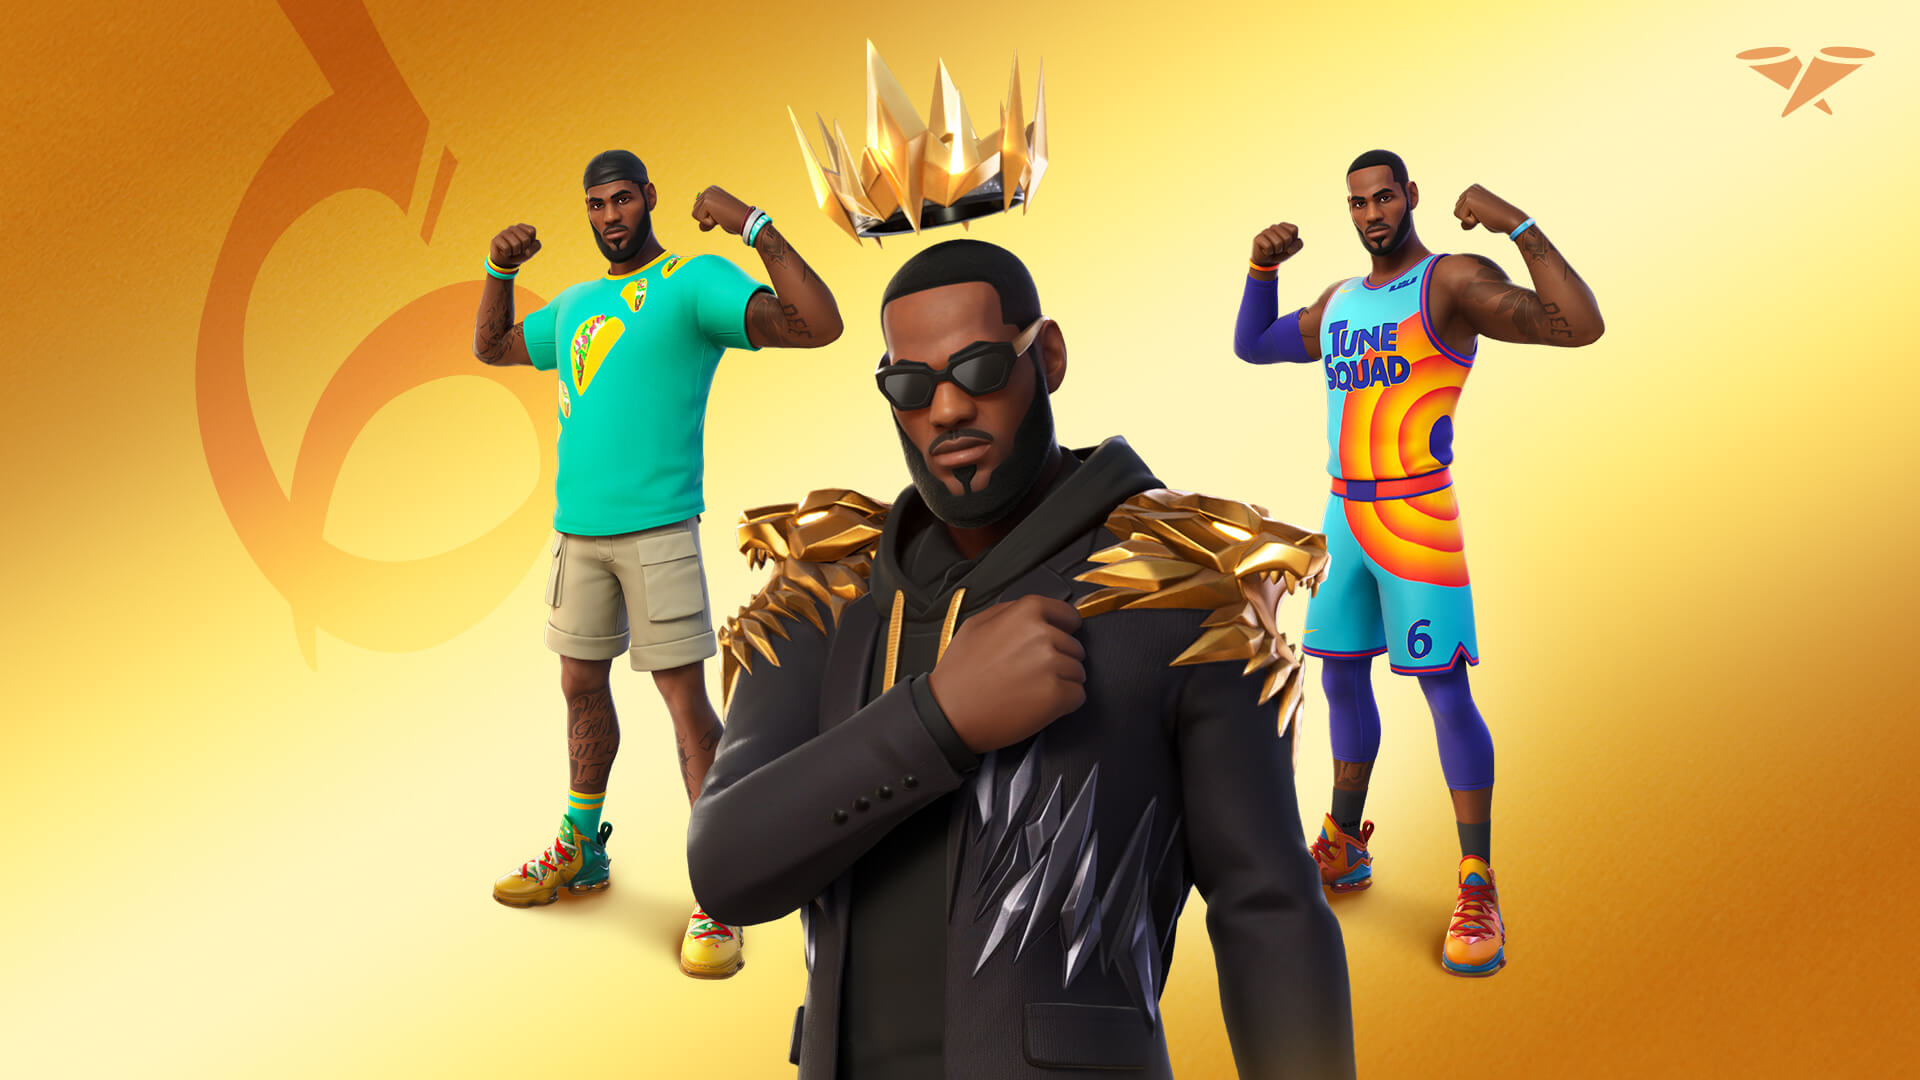 The King Has Arrived: LeBron James Joins Fortnite's Icon Series